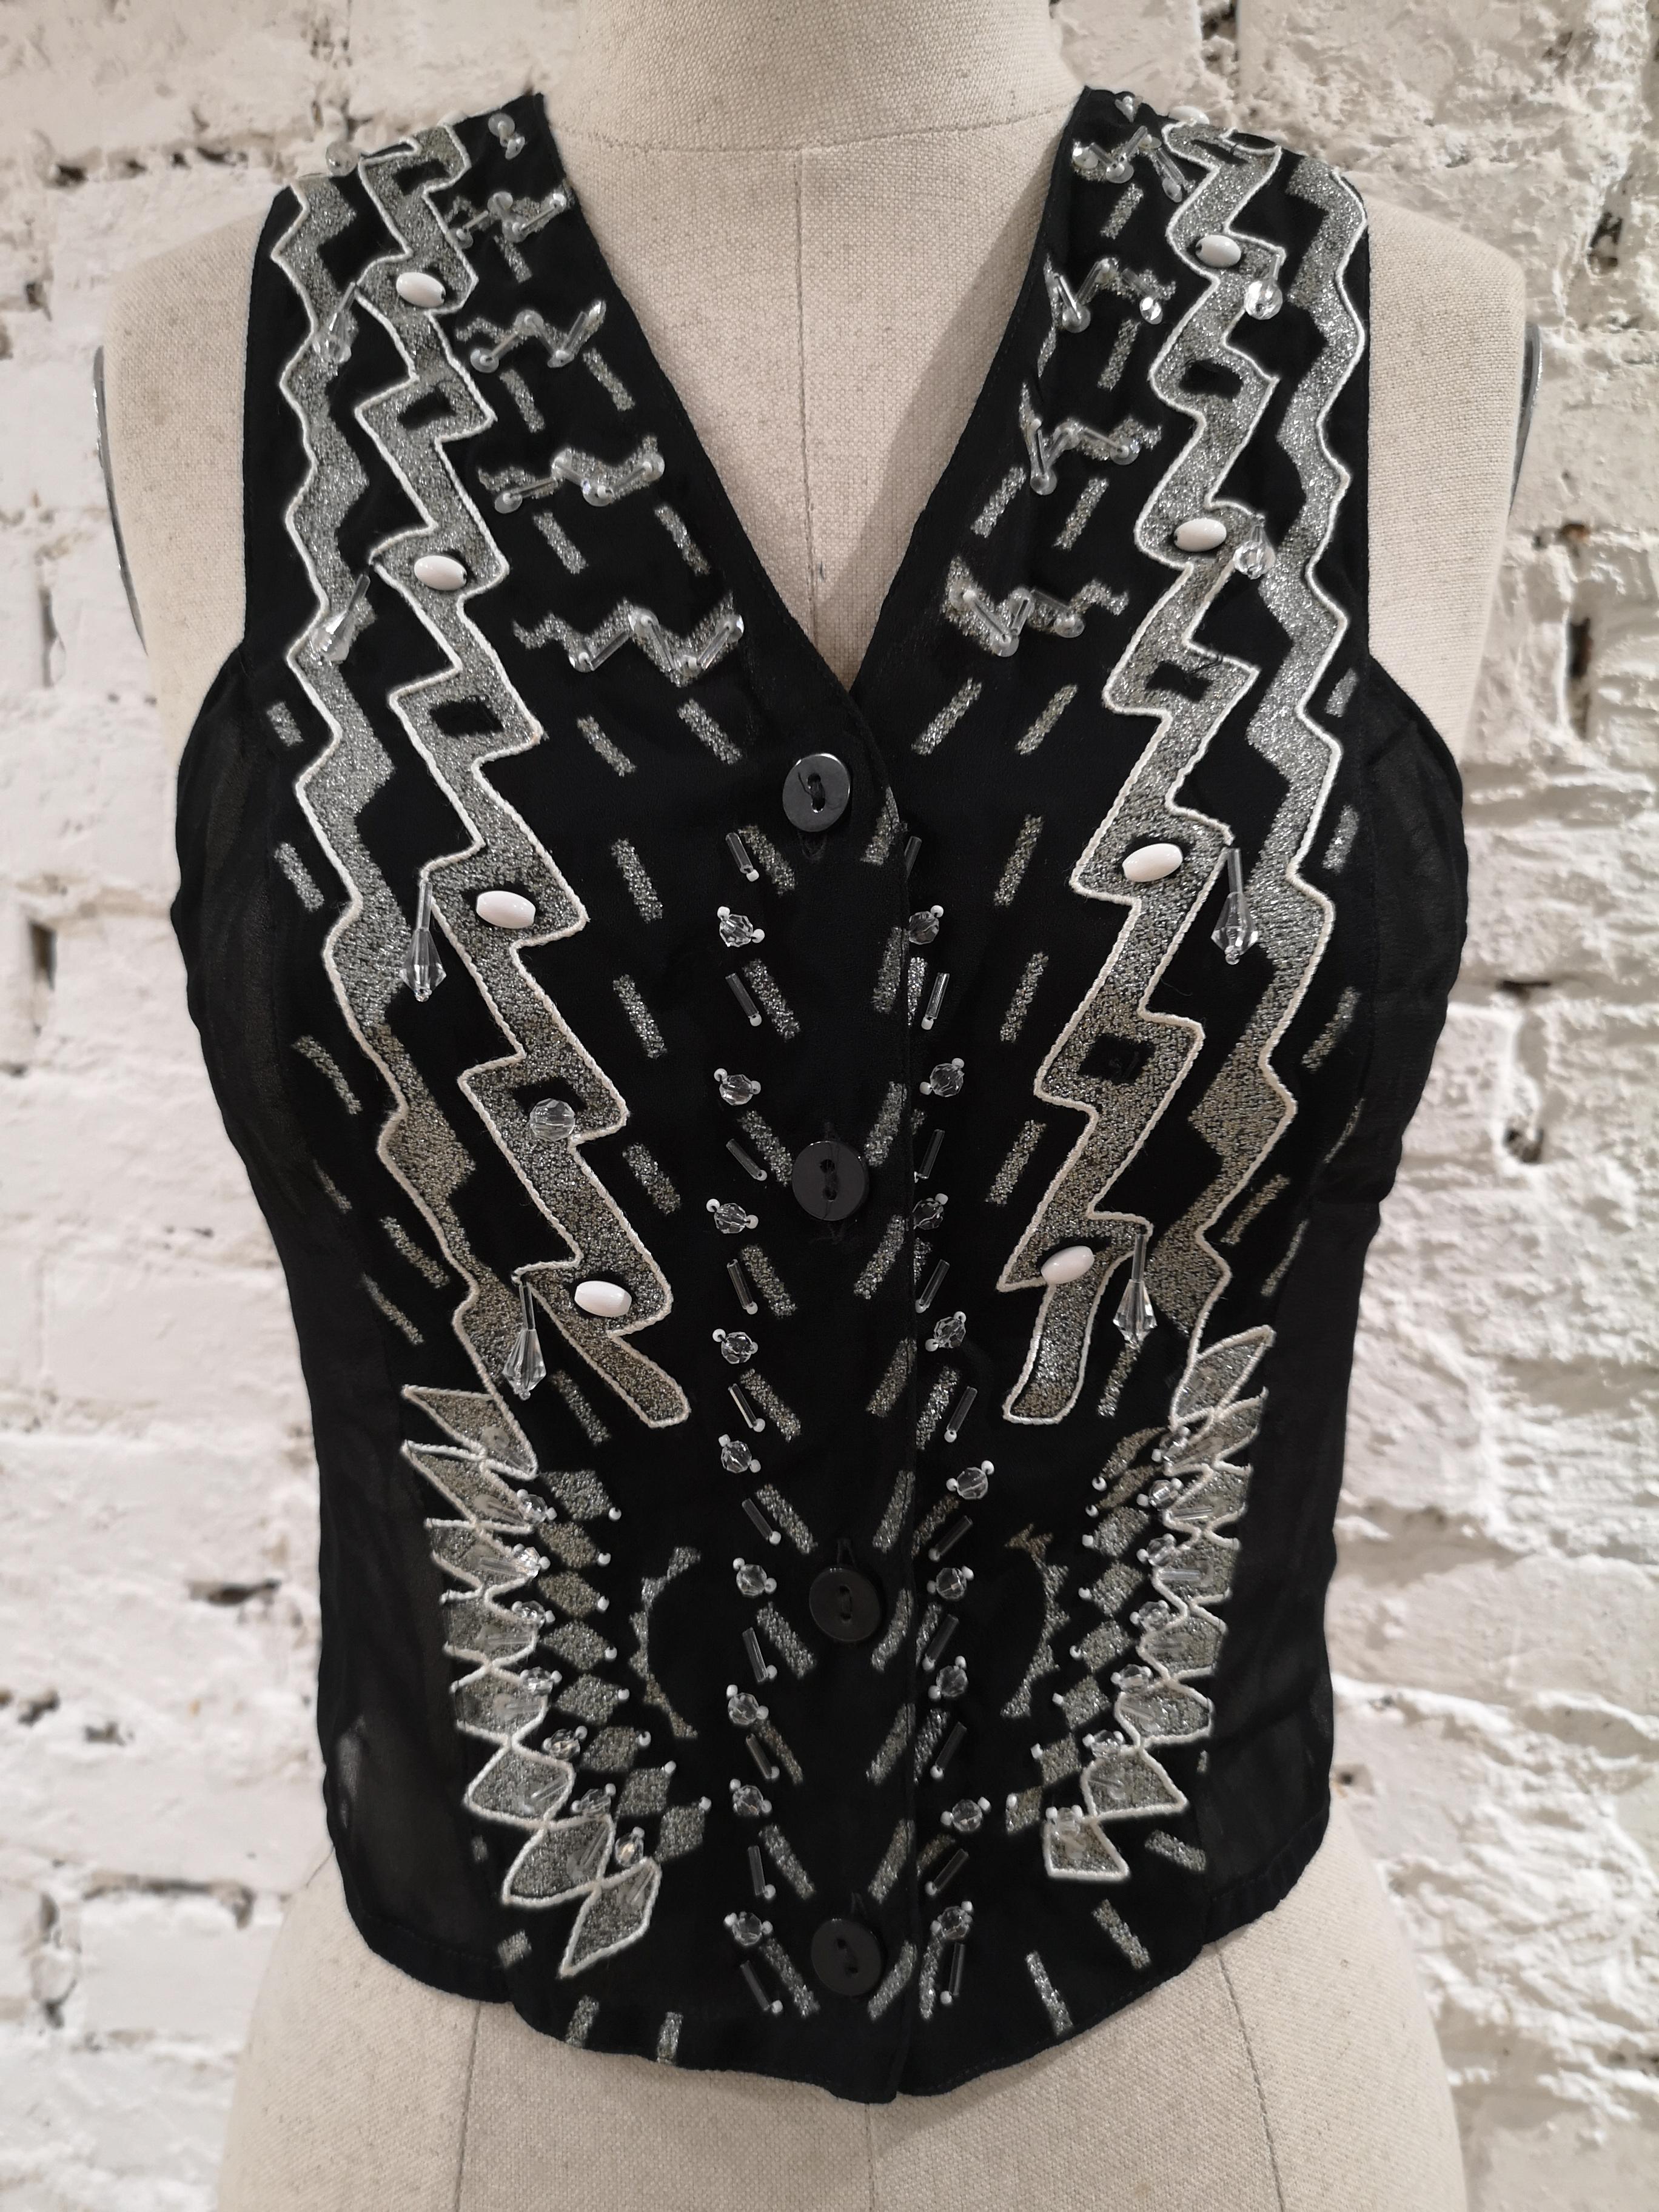 Byblos black and silver with beads vest
composition Acetate
size M 